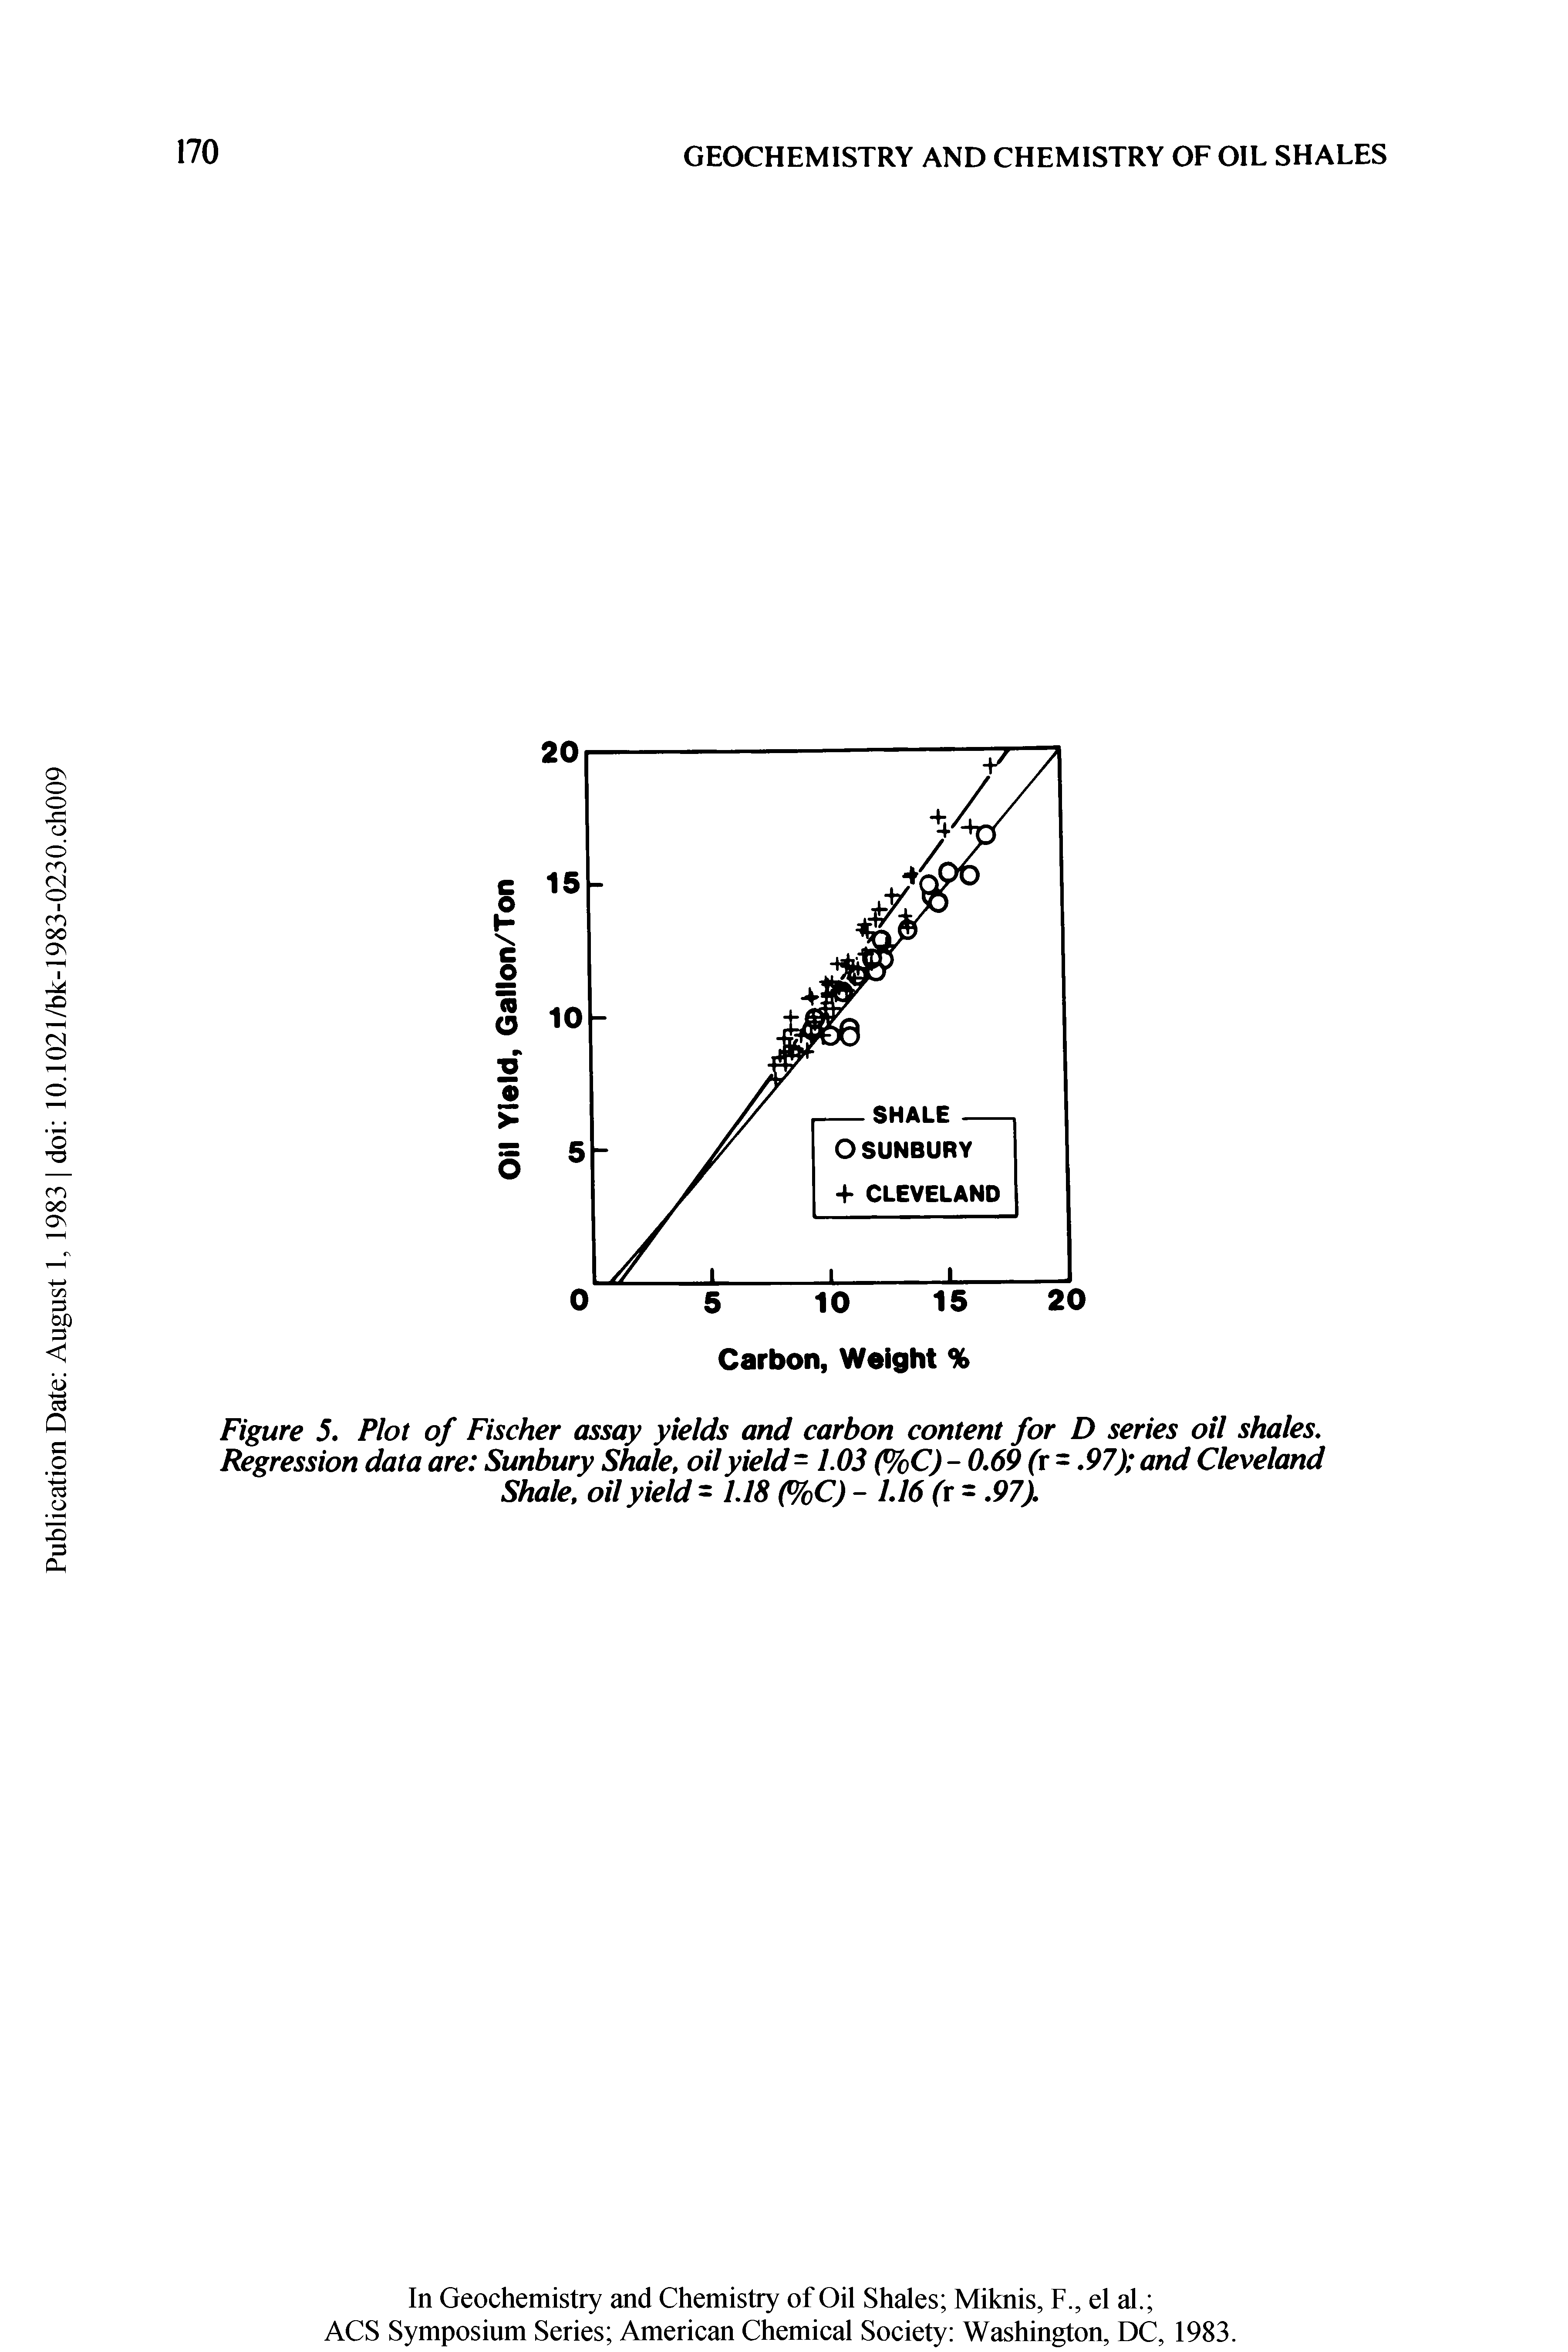 Figure 5. Plot of Fischer assay yields and carbon content for D series oil shales. Regression data are Sunbury Shale, oil yield - 1.03 (%C) - 0.69 (r =. 97) and Cleveland Shale, oil yield- 1.18 (%C) - 1.16 (r =. 97).